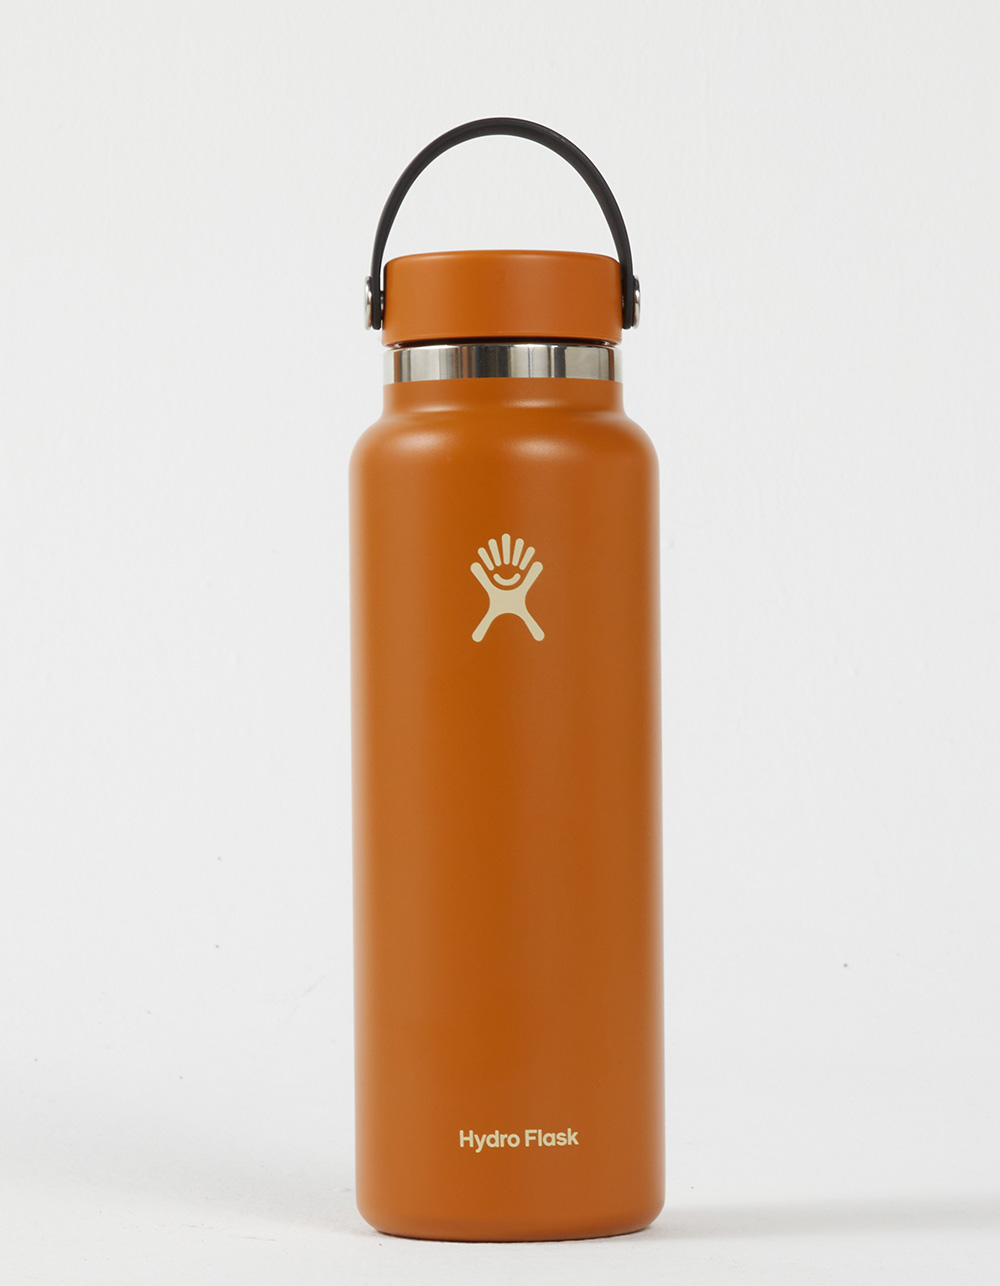 Hydro Flask 64oz Wide Mouth Copper Brown